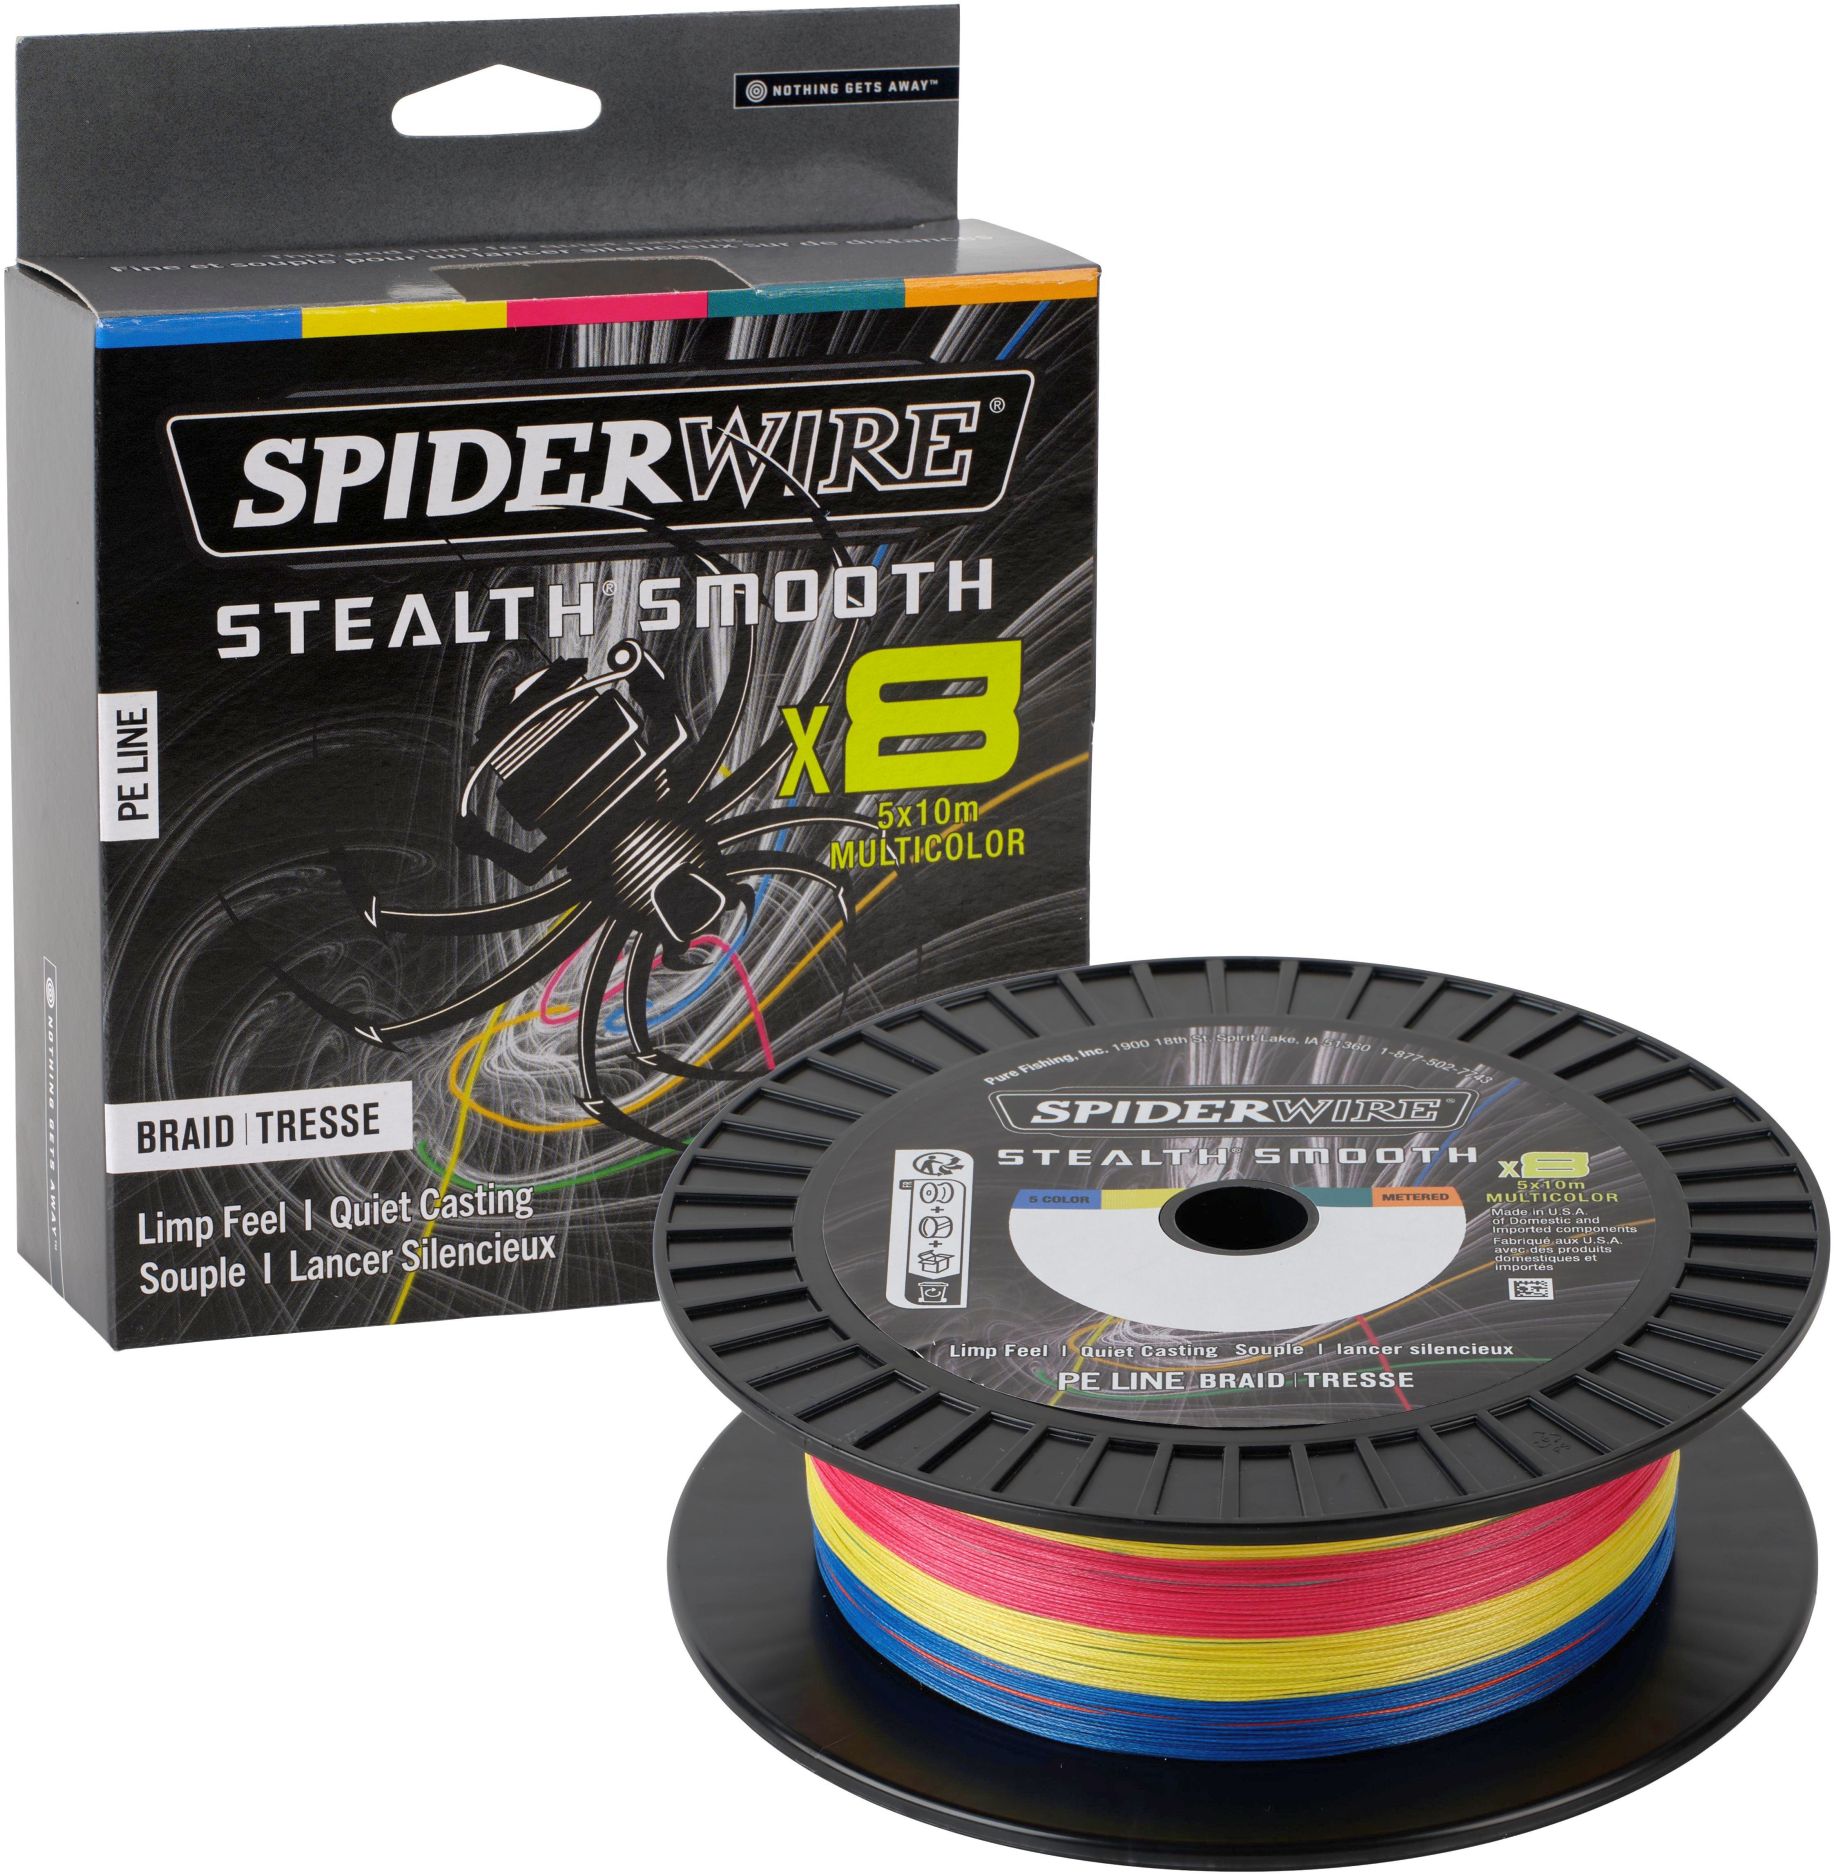 SPIDERWIRE Stealth Smooth 8 Multicolor 600 m 0,29 mm 26,4 kg